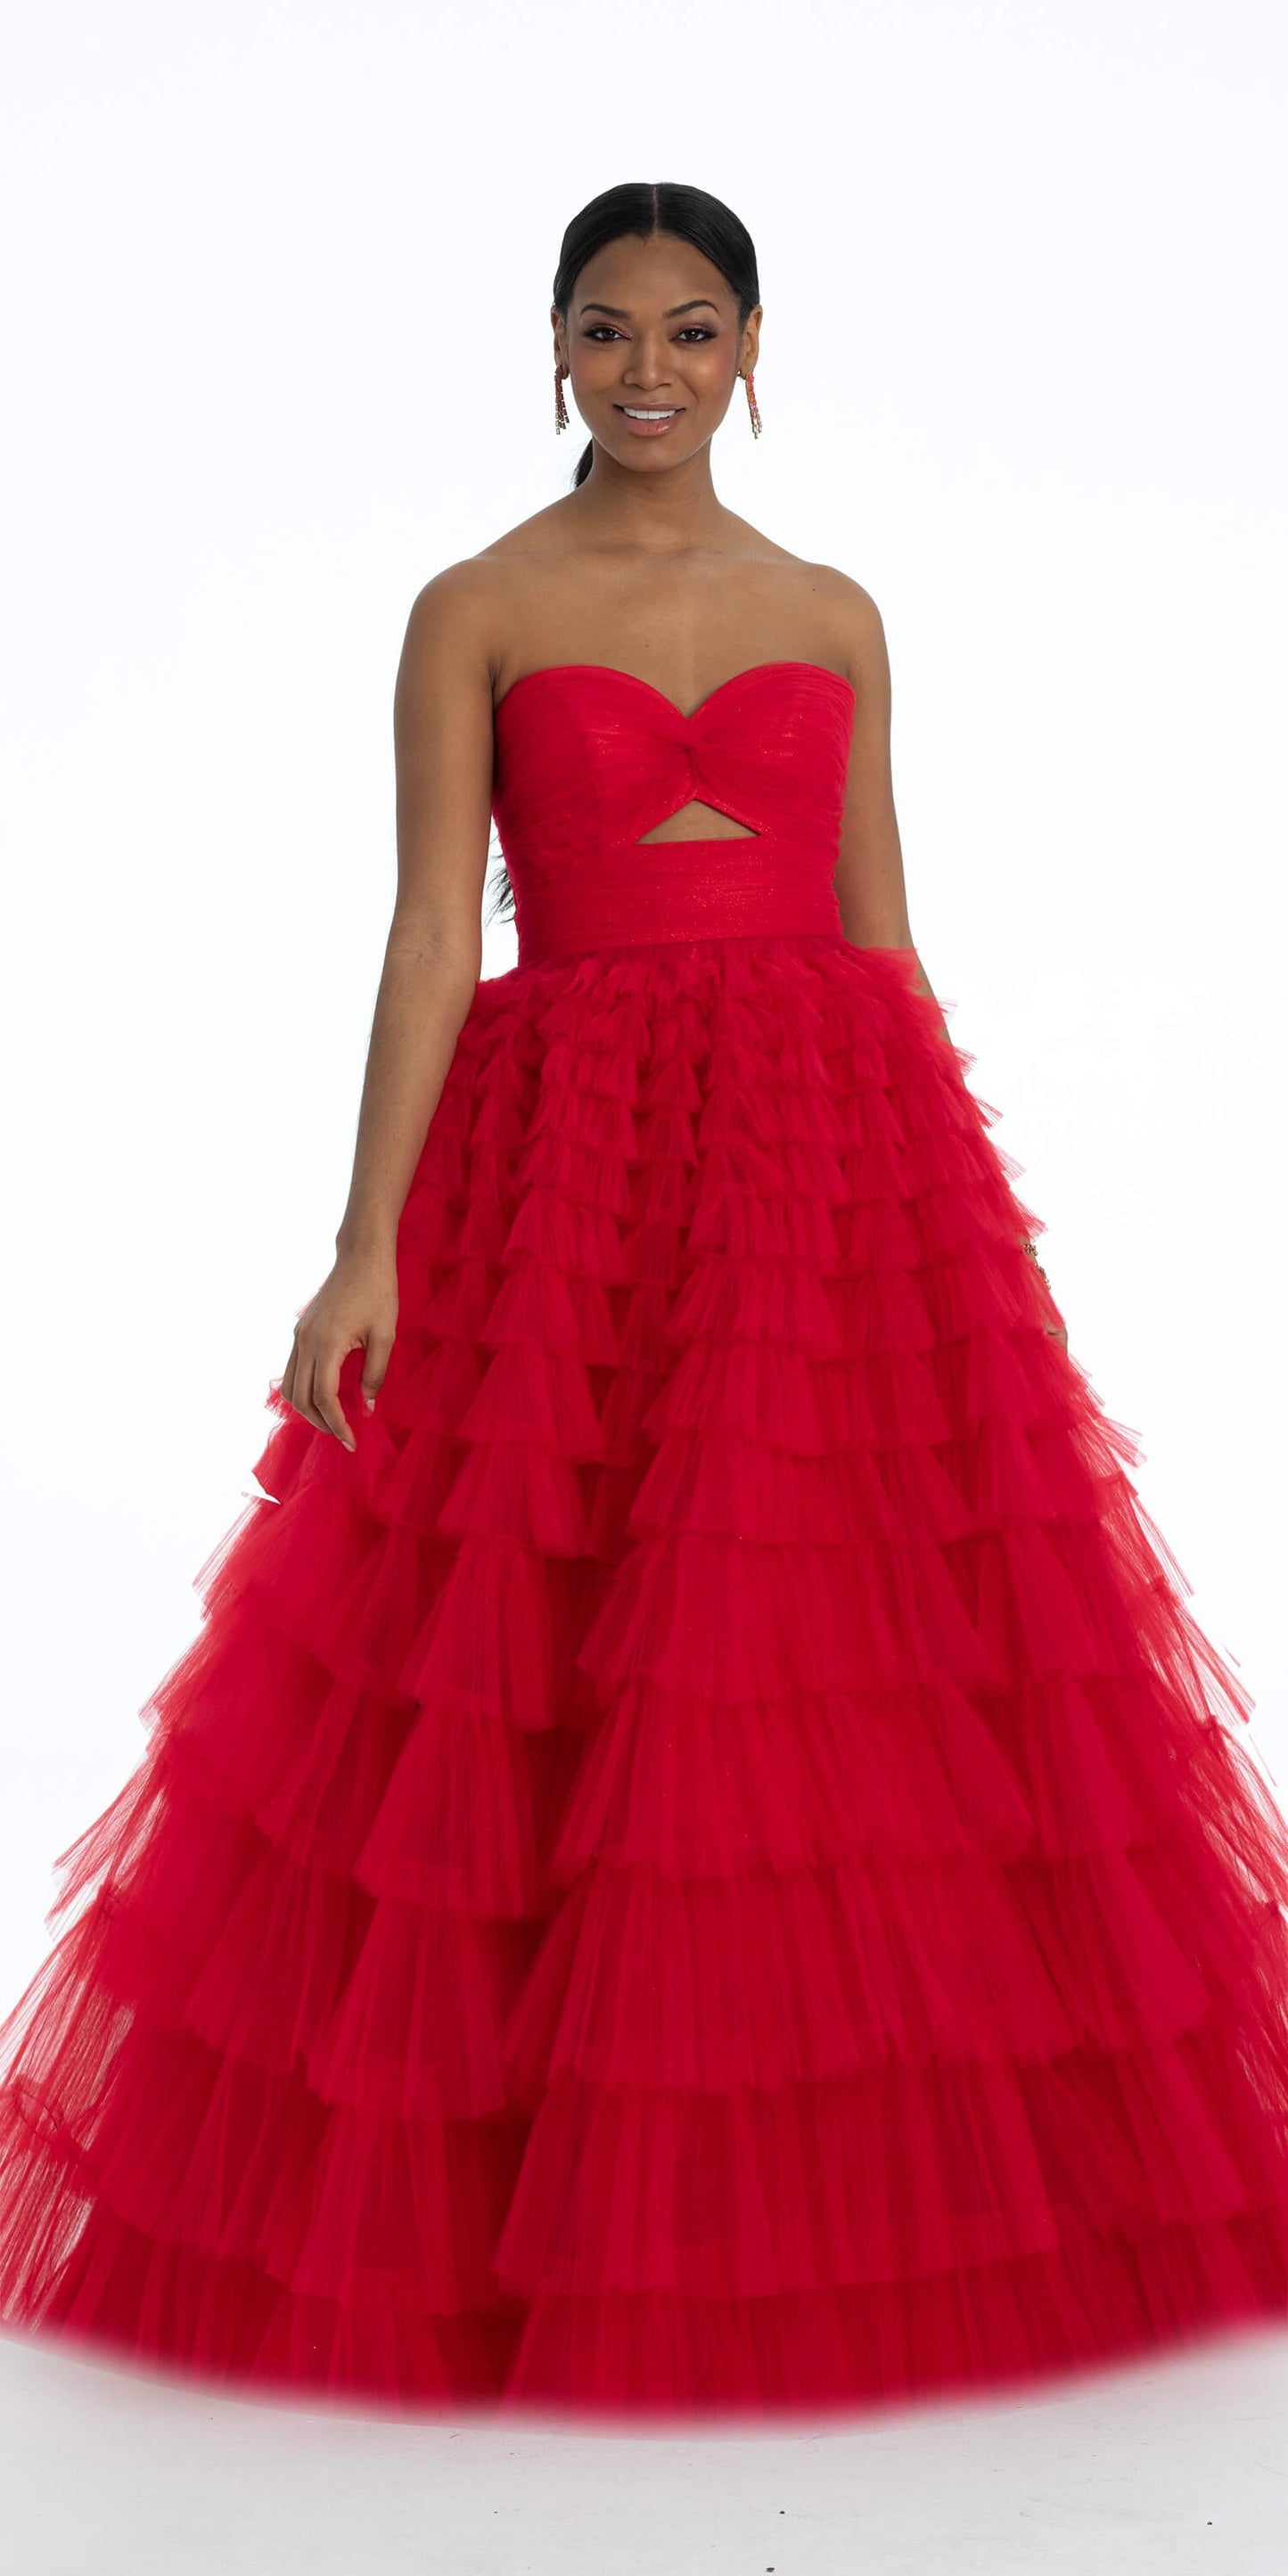 Camille La Vie Pleated Tulle Ballgown with Peek-A-Boo Bodice missy / 0 / dark-red